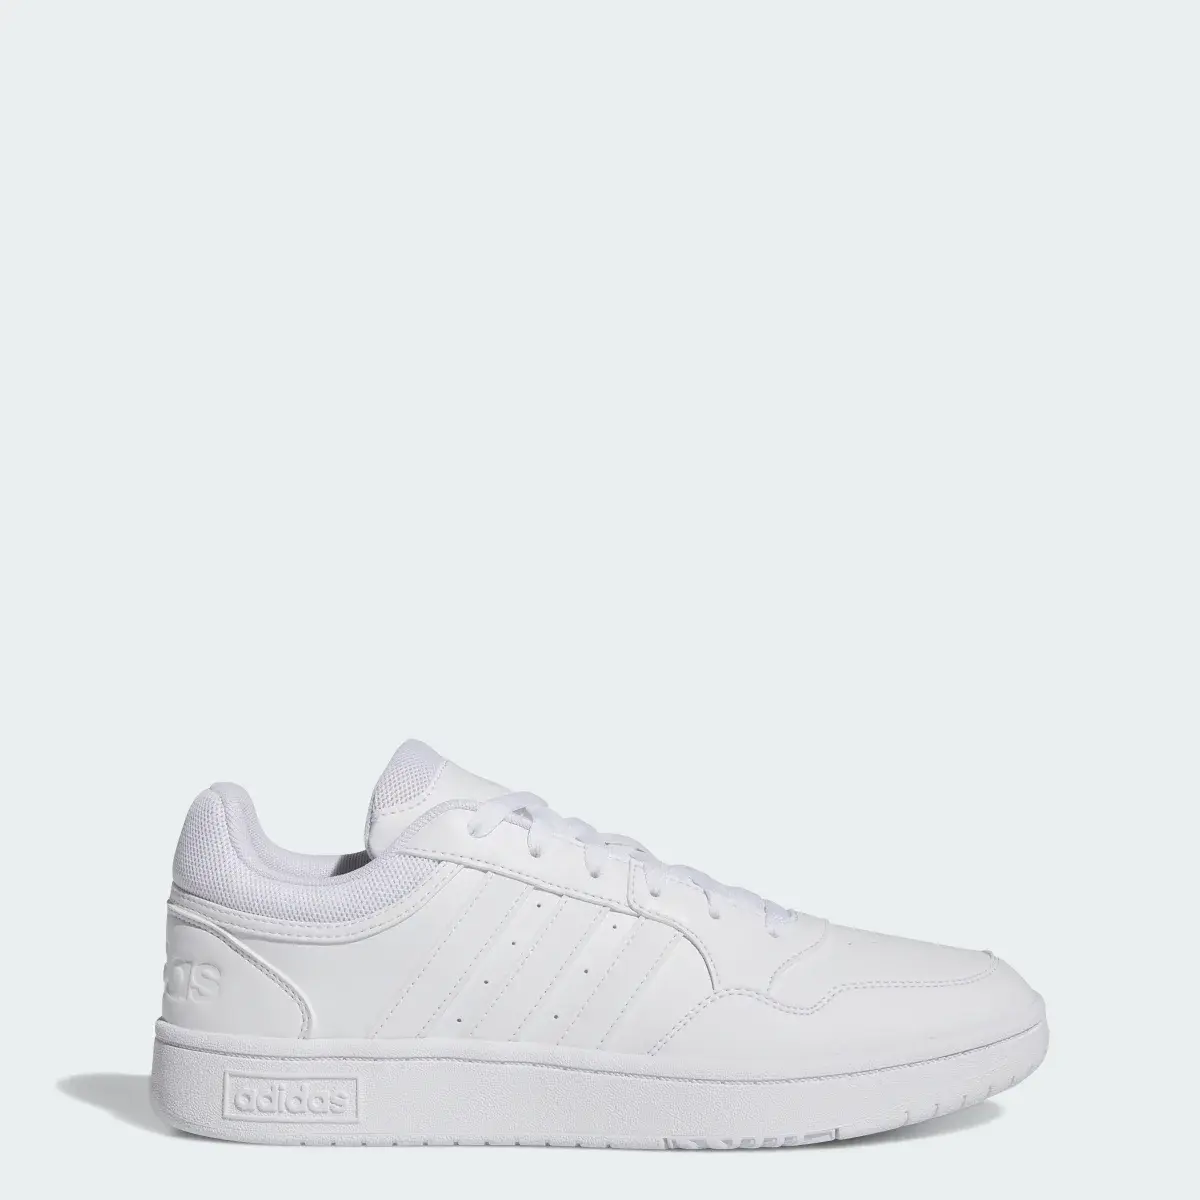 Adidas Hoops 3.0 Low Classic Vintage Schuh. 1